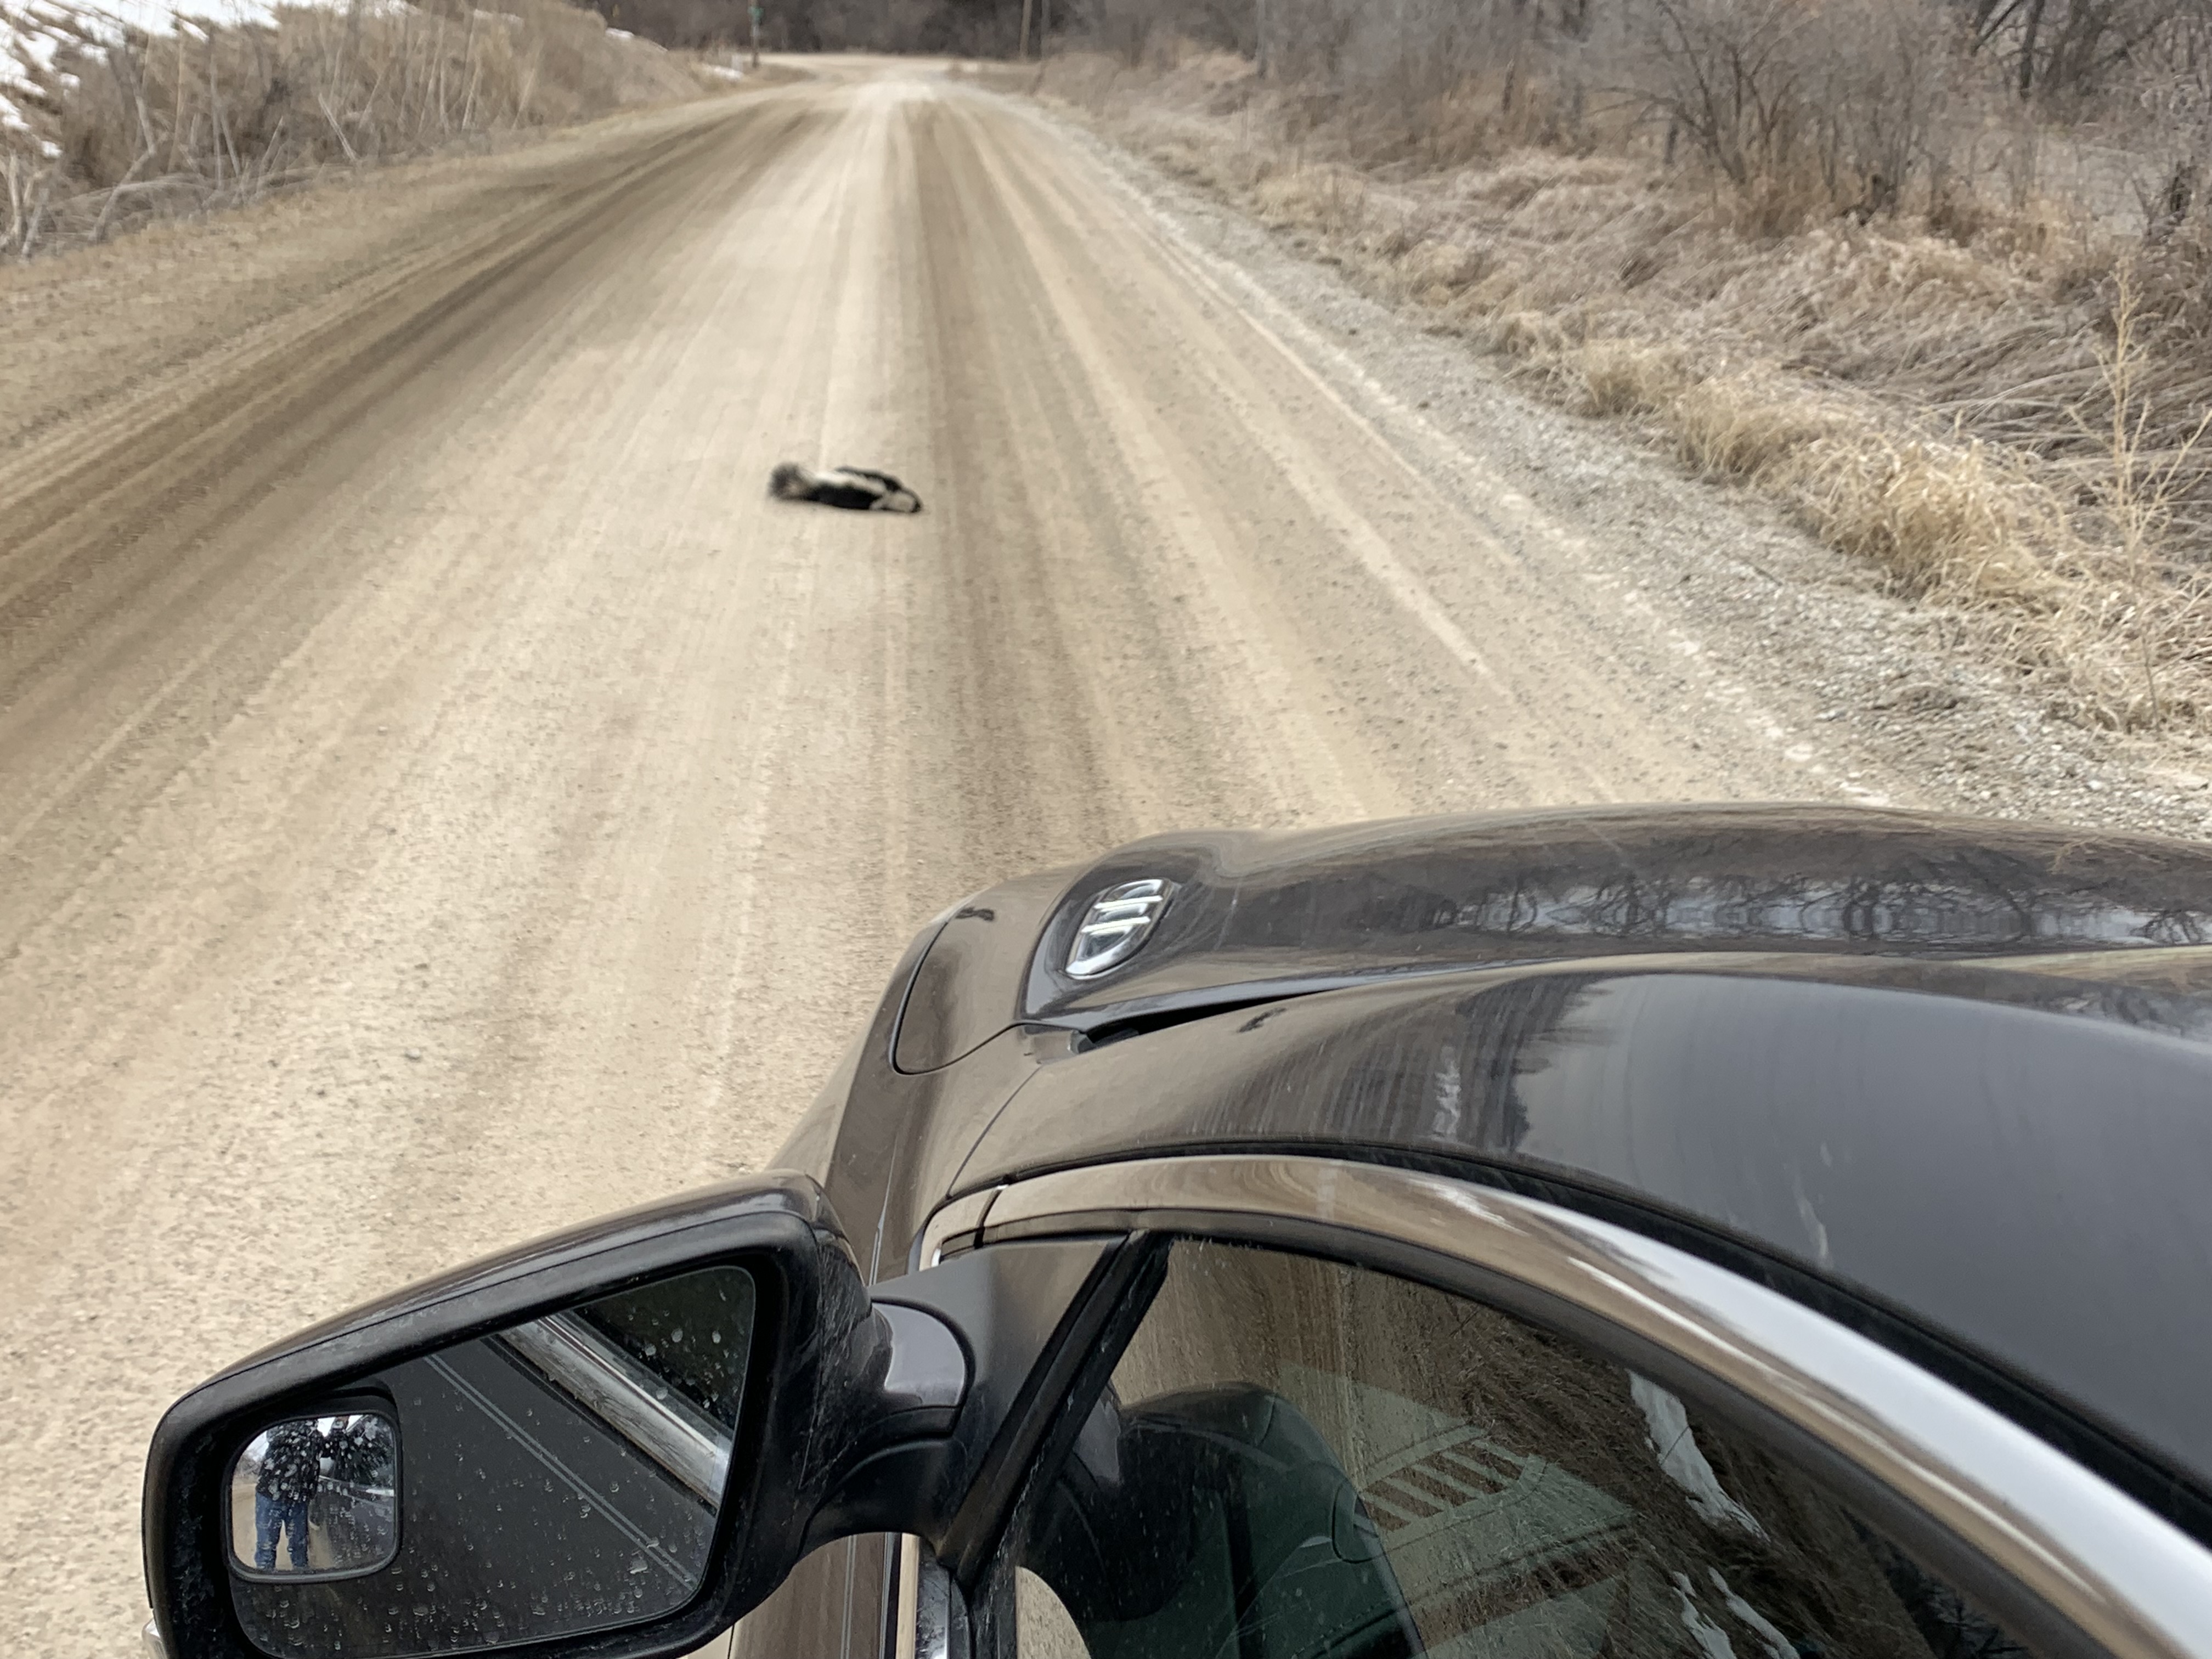 Road-kill skunk viewed from an auto on a lonely country road.